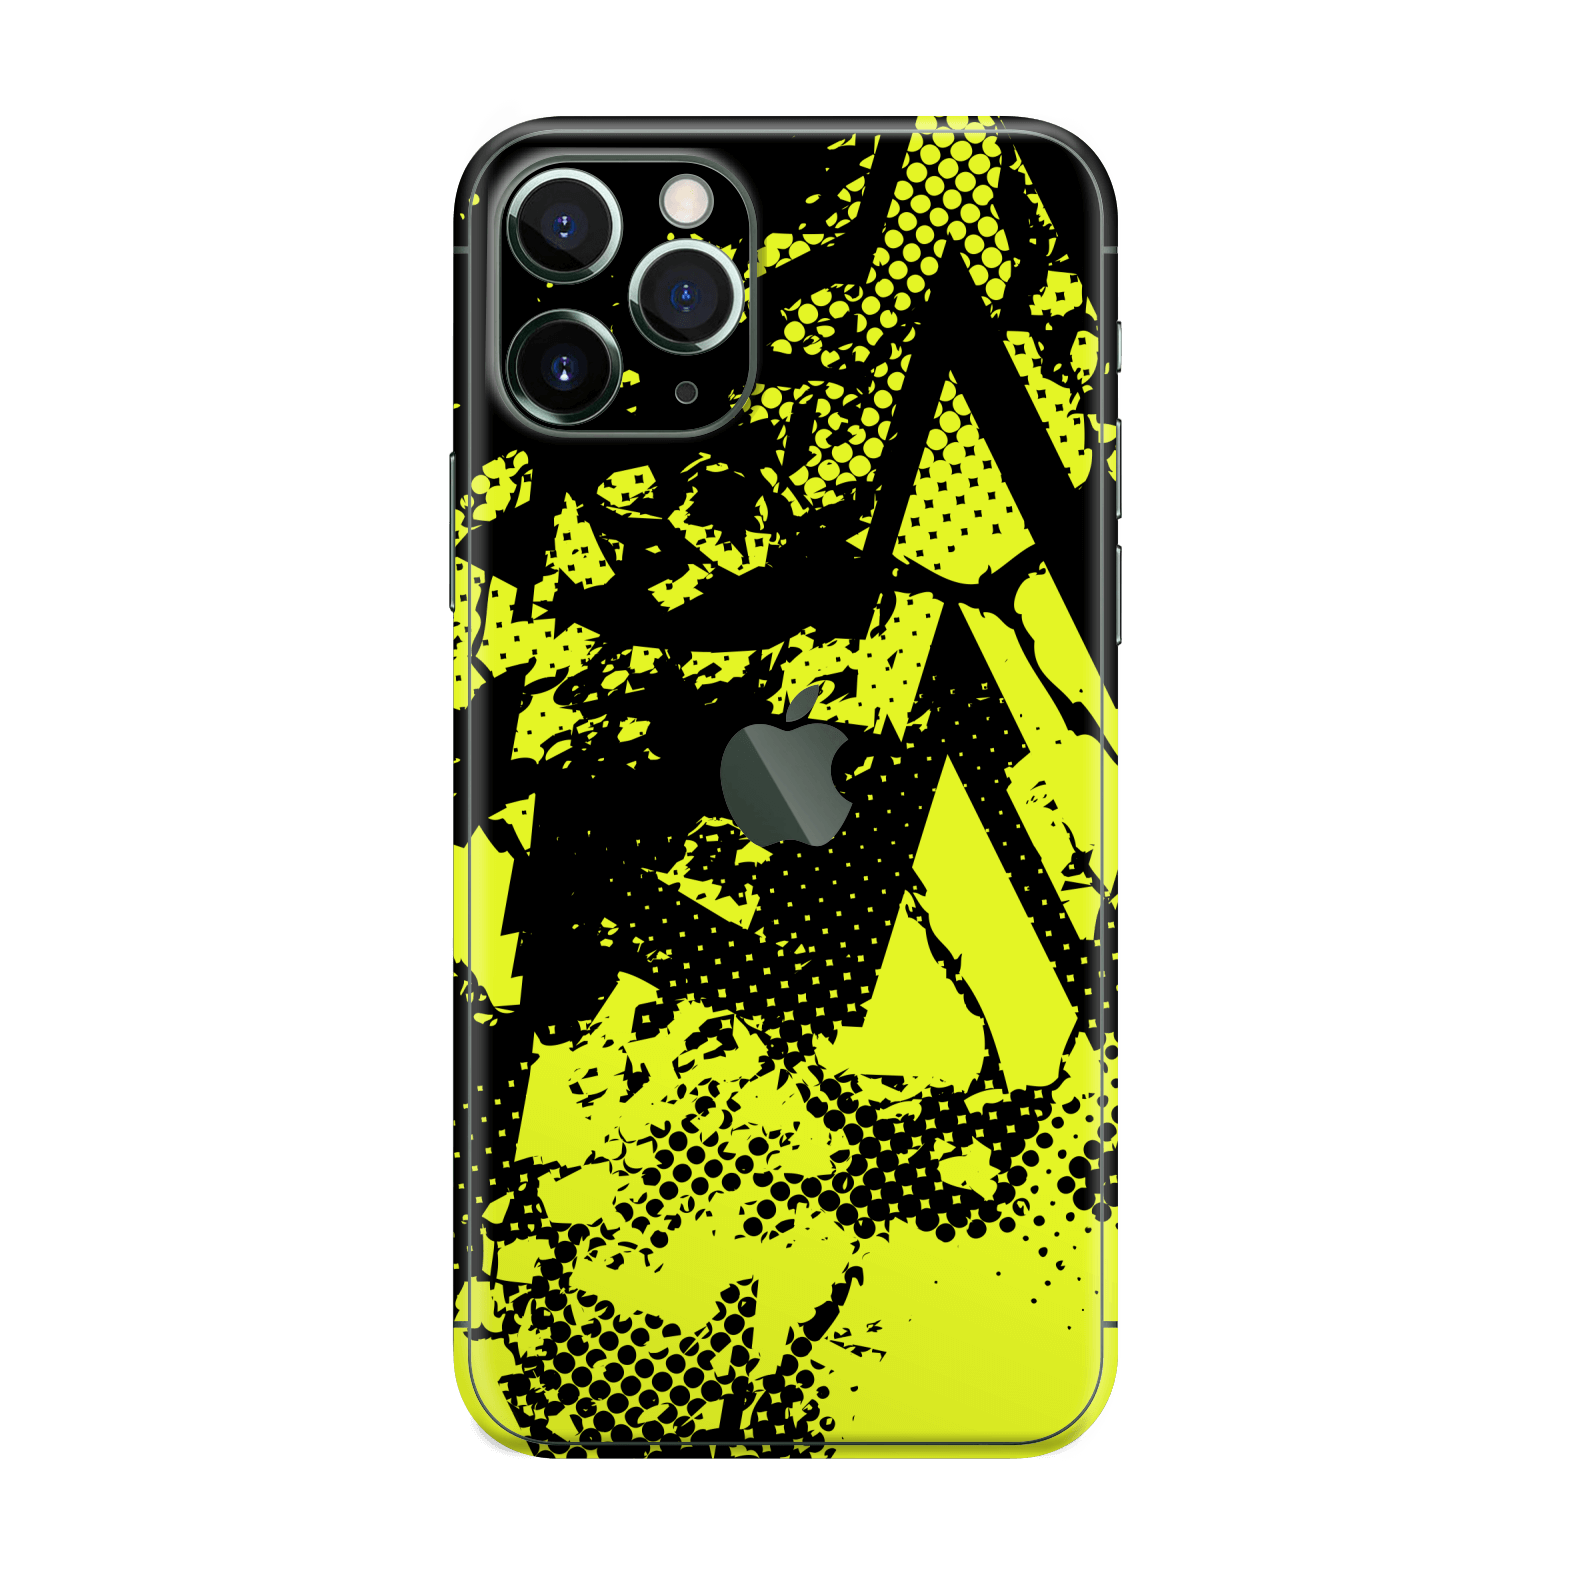 iPhone 11 PRO Print Printed Custom SIGNATURE Grunge Yellow Green Trace Skin Wrap Sticker Decal Cover Protector by QSKINZ | QSKINZ.COM